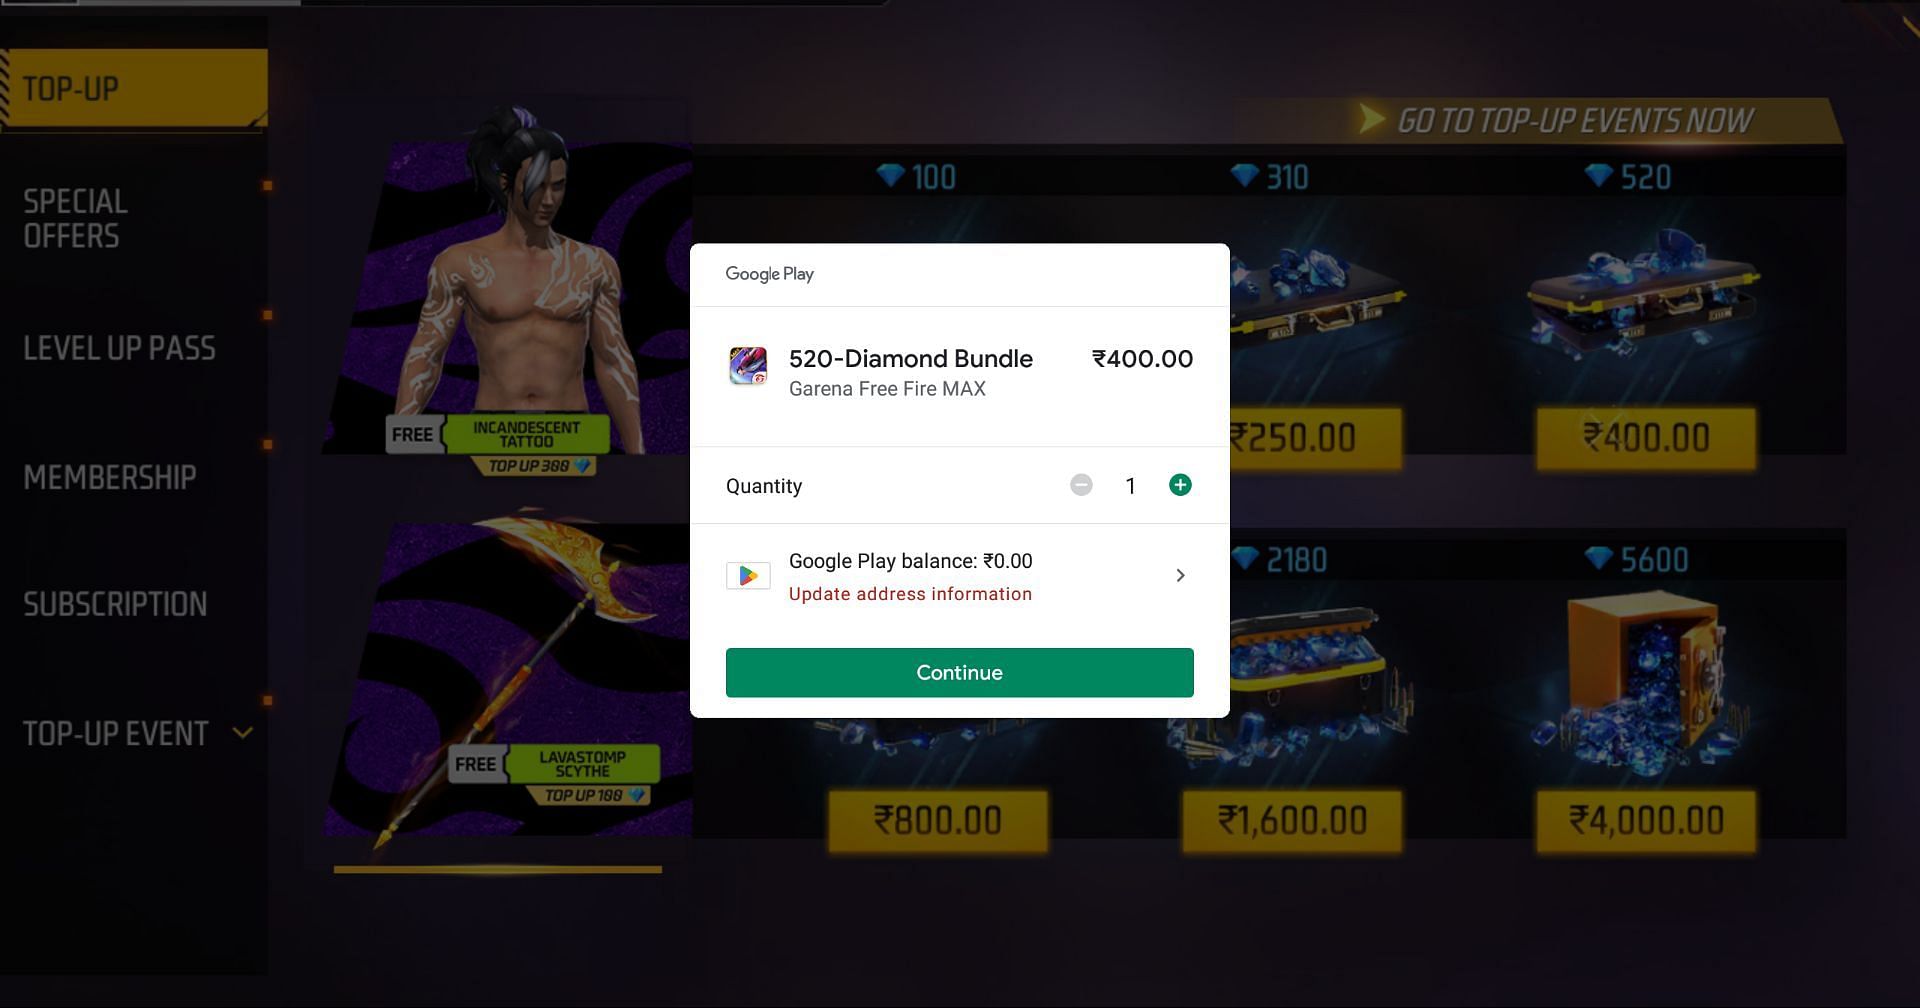 You can complete the payment to purchase the diamonds and fulfill the requirements (Image via Garena)